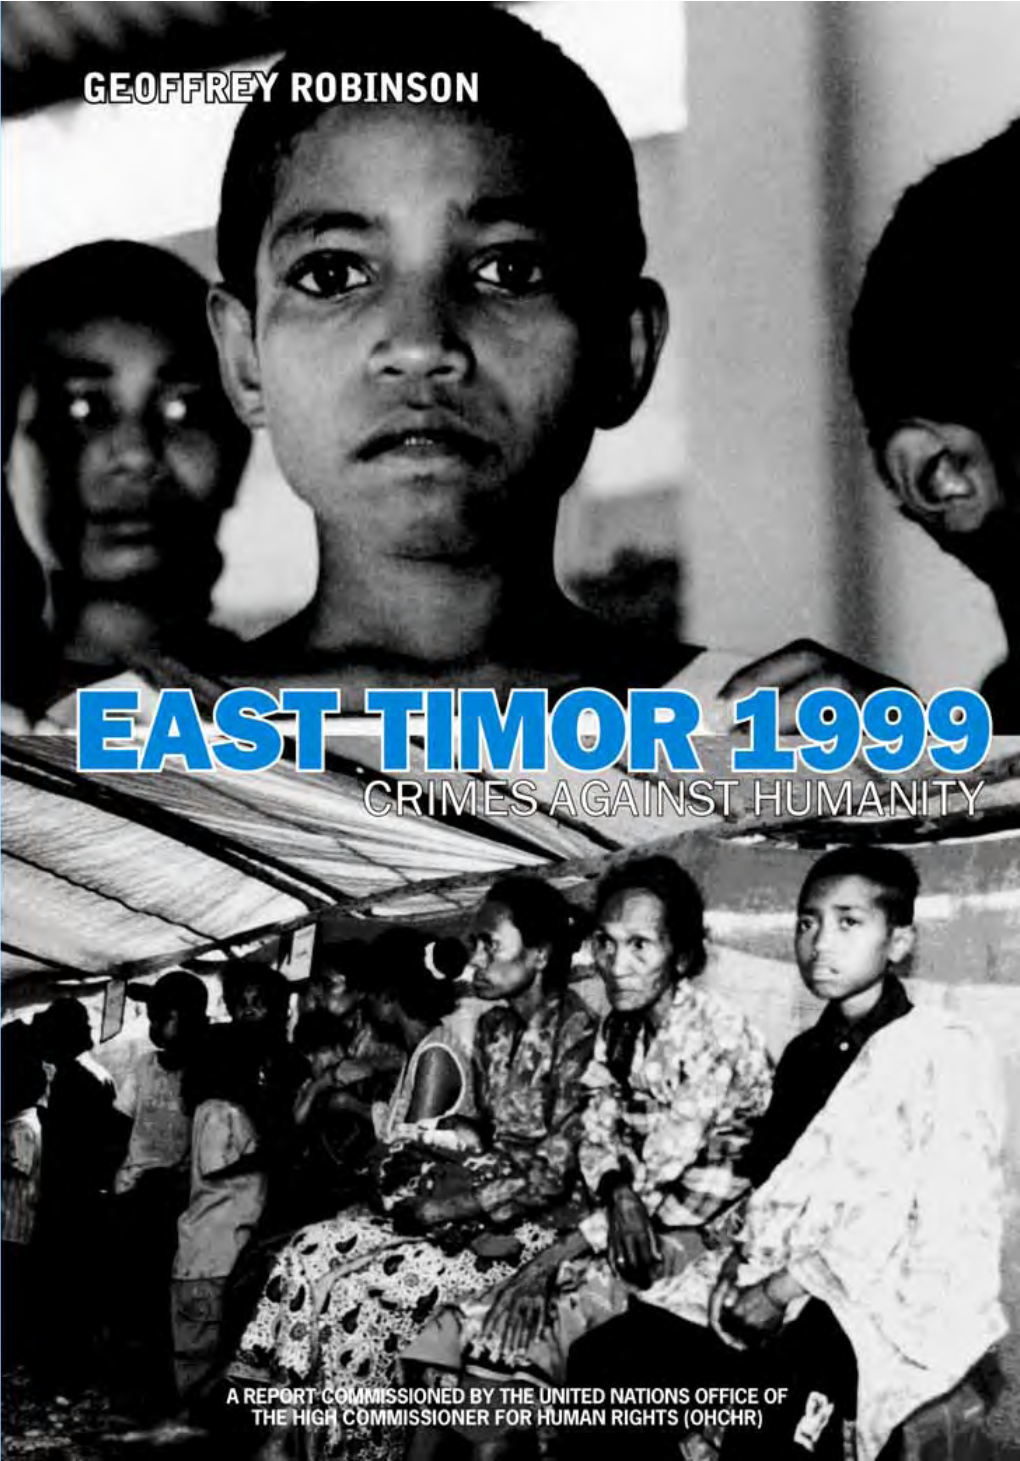 East Timor 1999: Crimes Against Humanity a Report Commissioned by the United Nations Office of the High Commissioner for Human Rights (OHCHR)